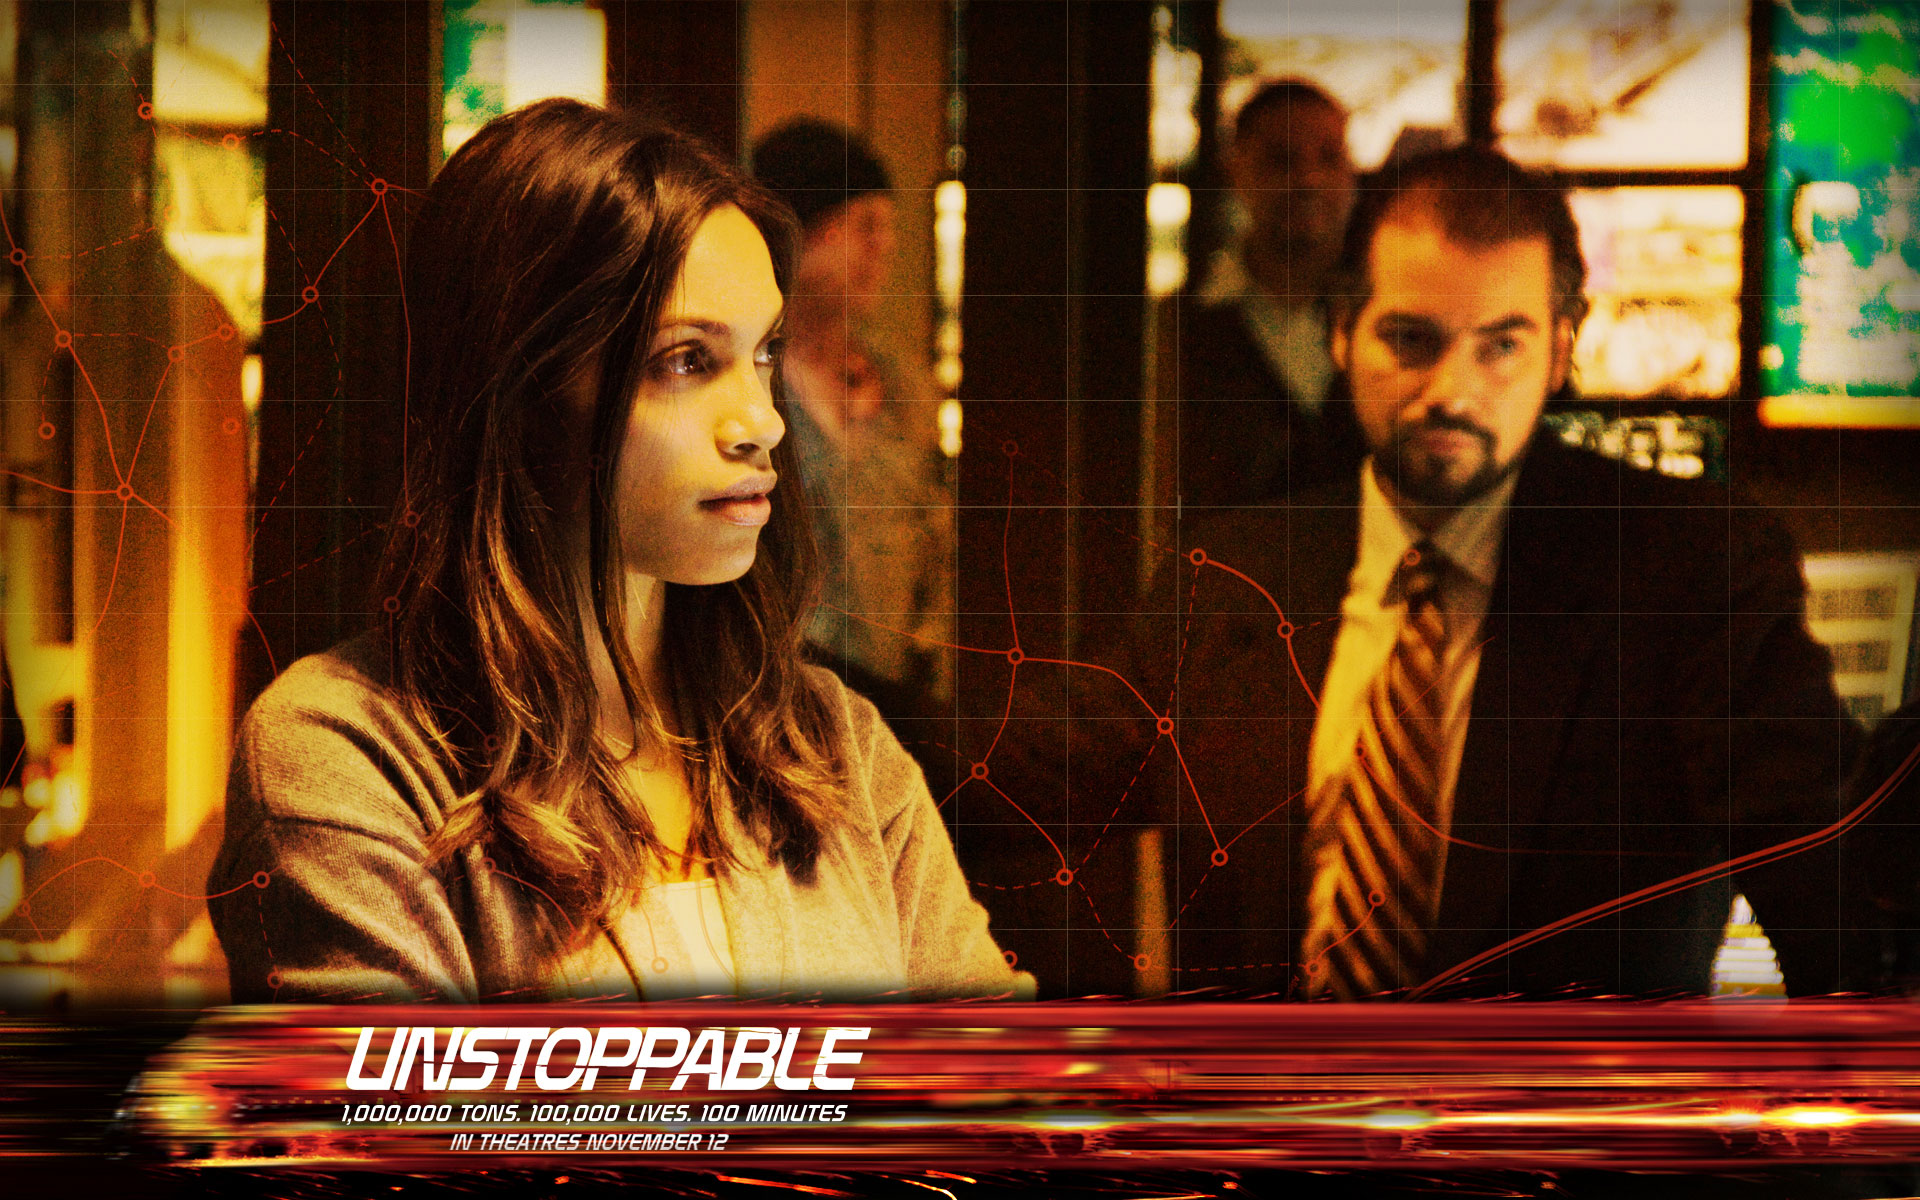 unstoppable 2010 poster